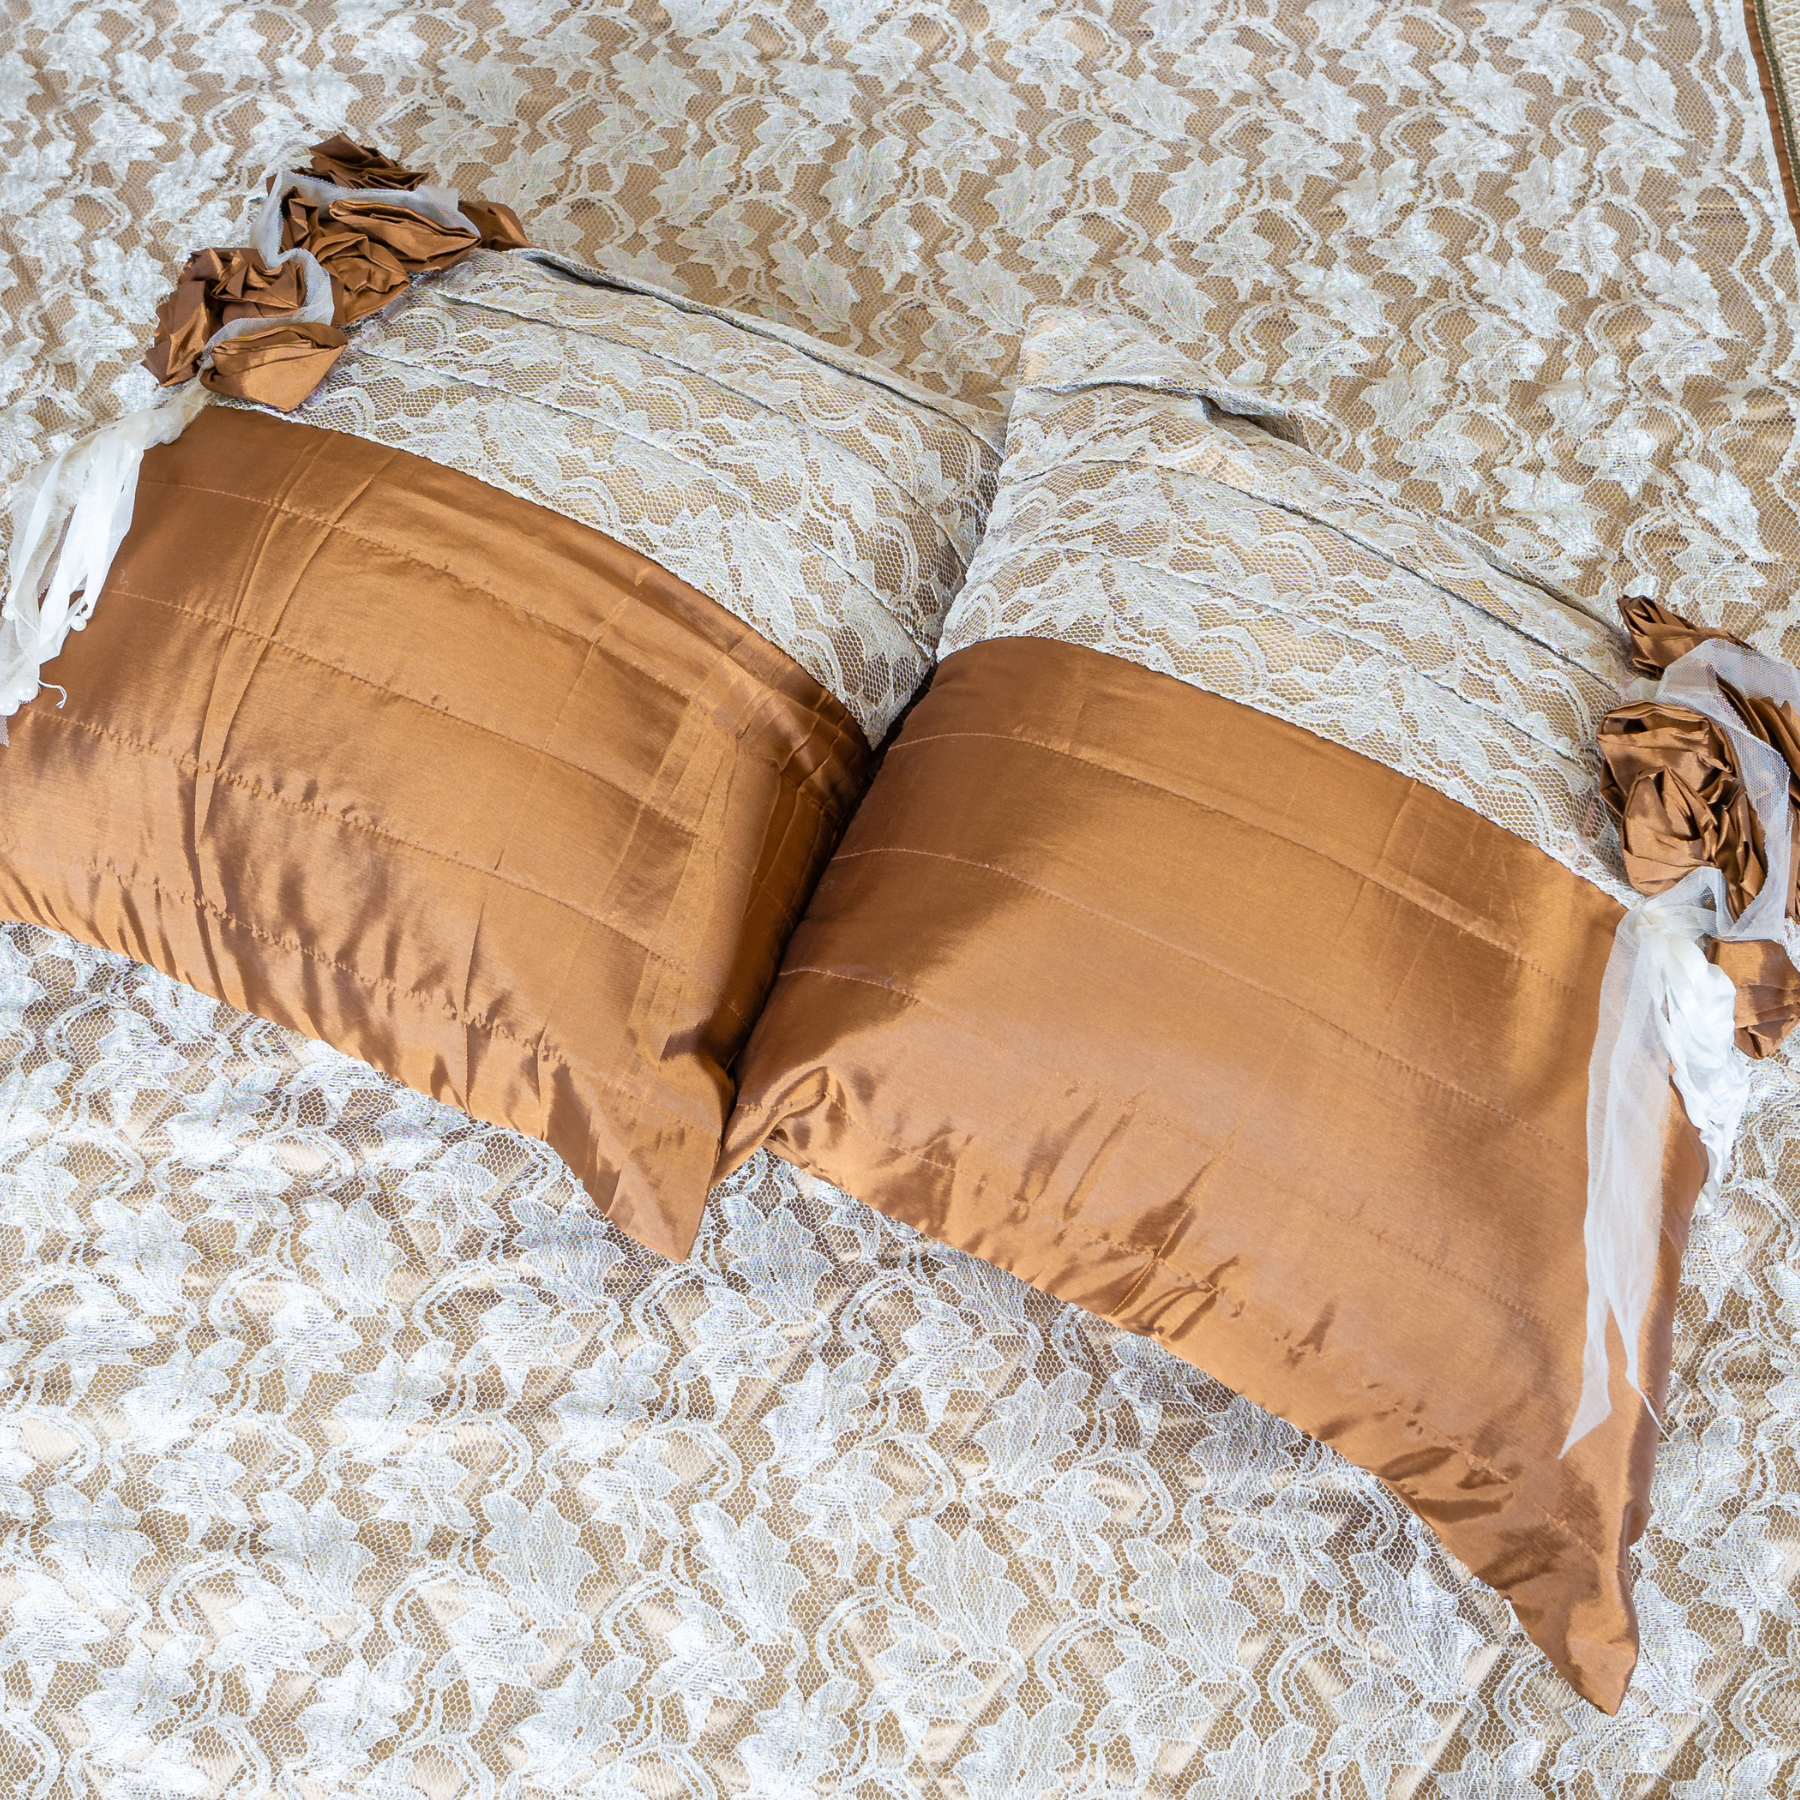 The LuxeLife Chantilly Lace Bedcover